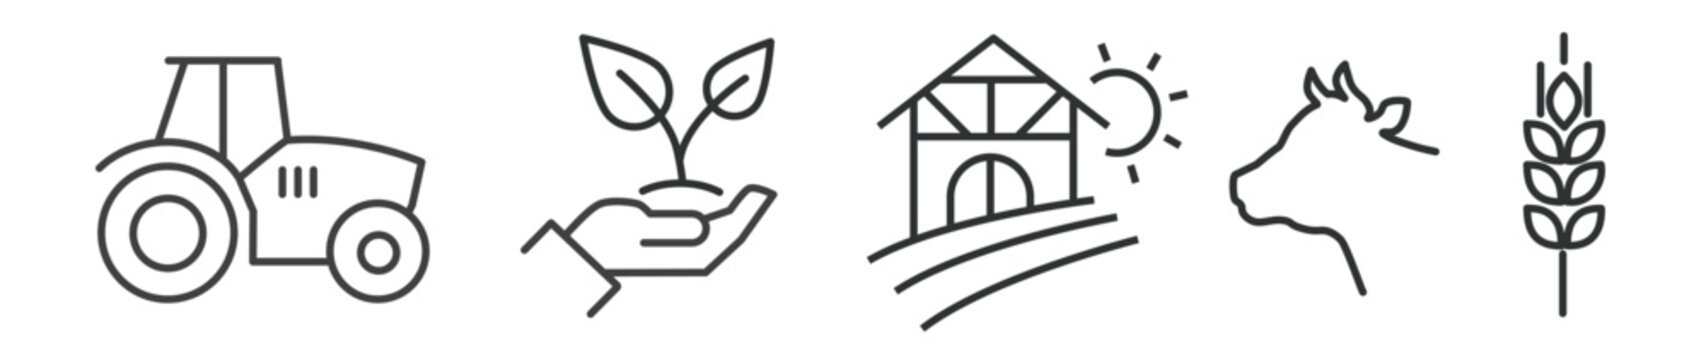 Agriculture and mixed farming - thin line icon collection on white background - vector illustration